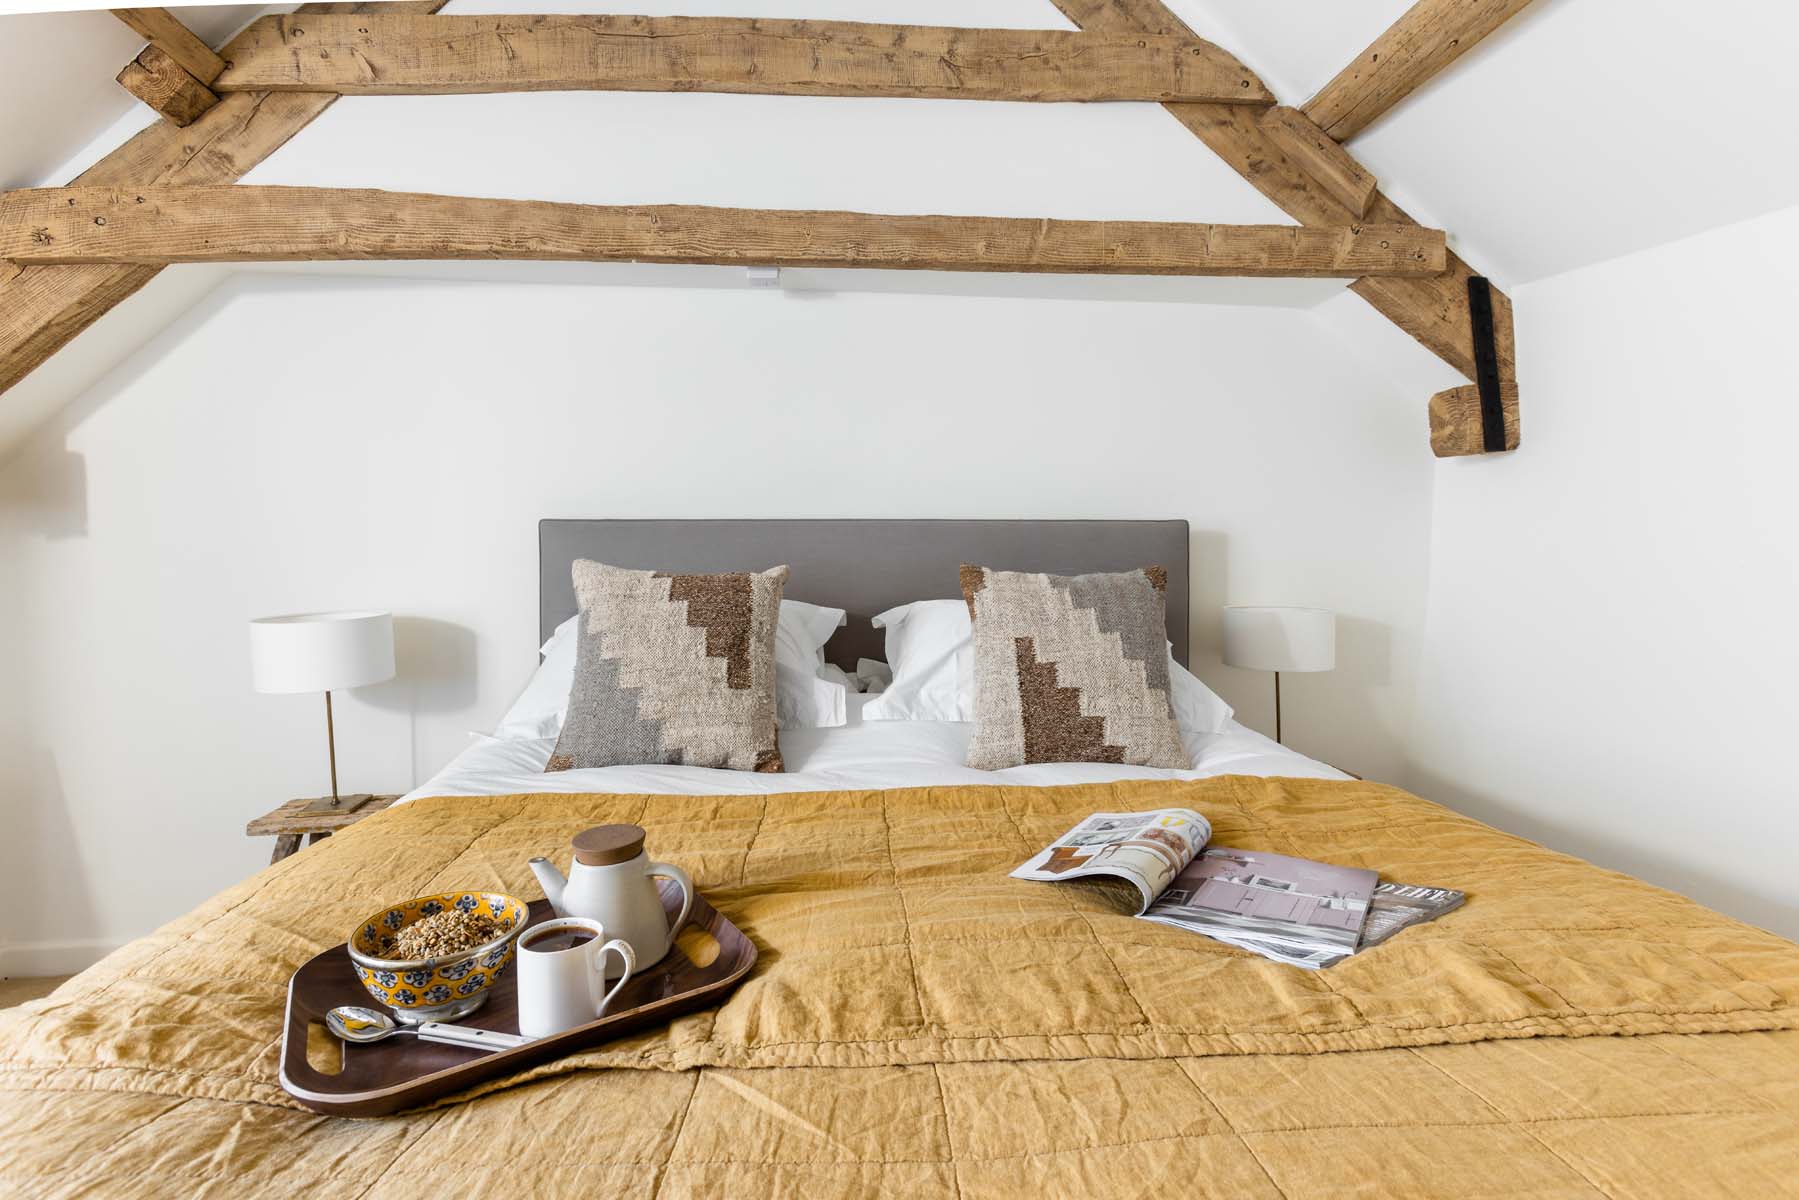 Breakfast and magazines in bed at Stone Cottage